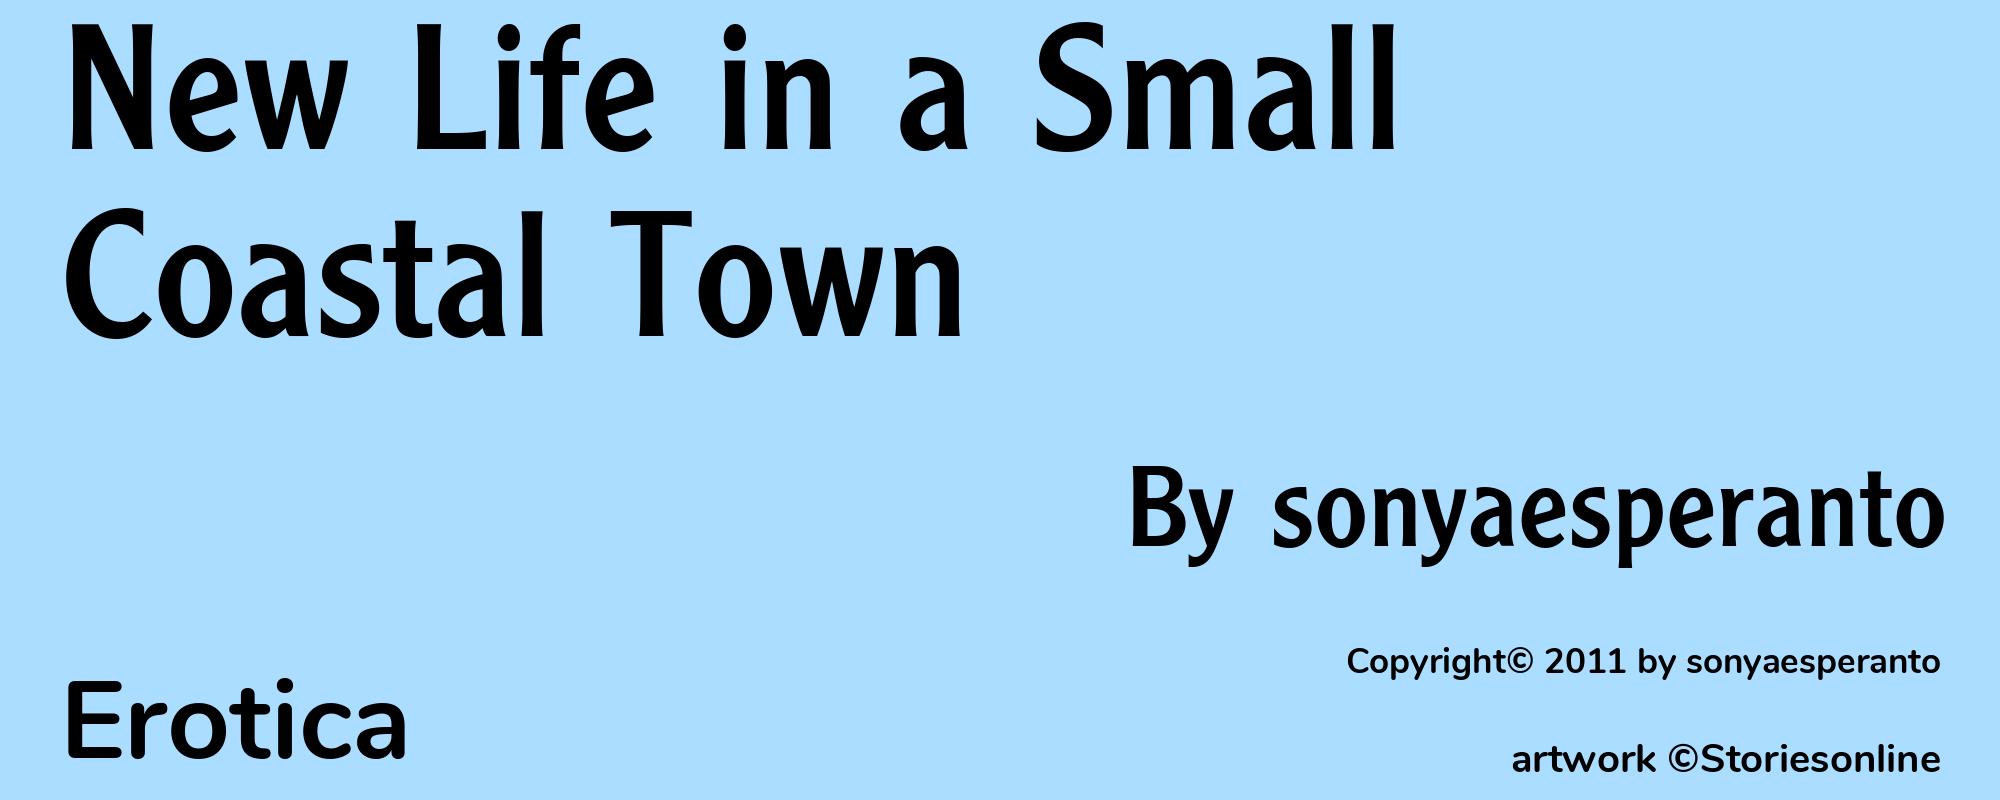 New Life in a Small Coastal Town - Cover